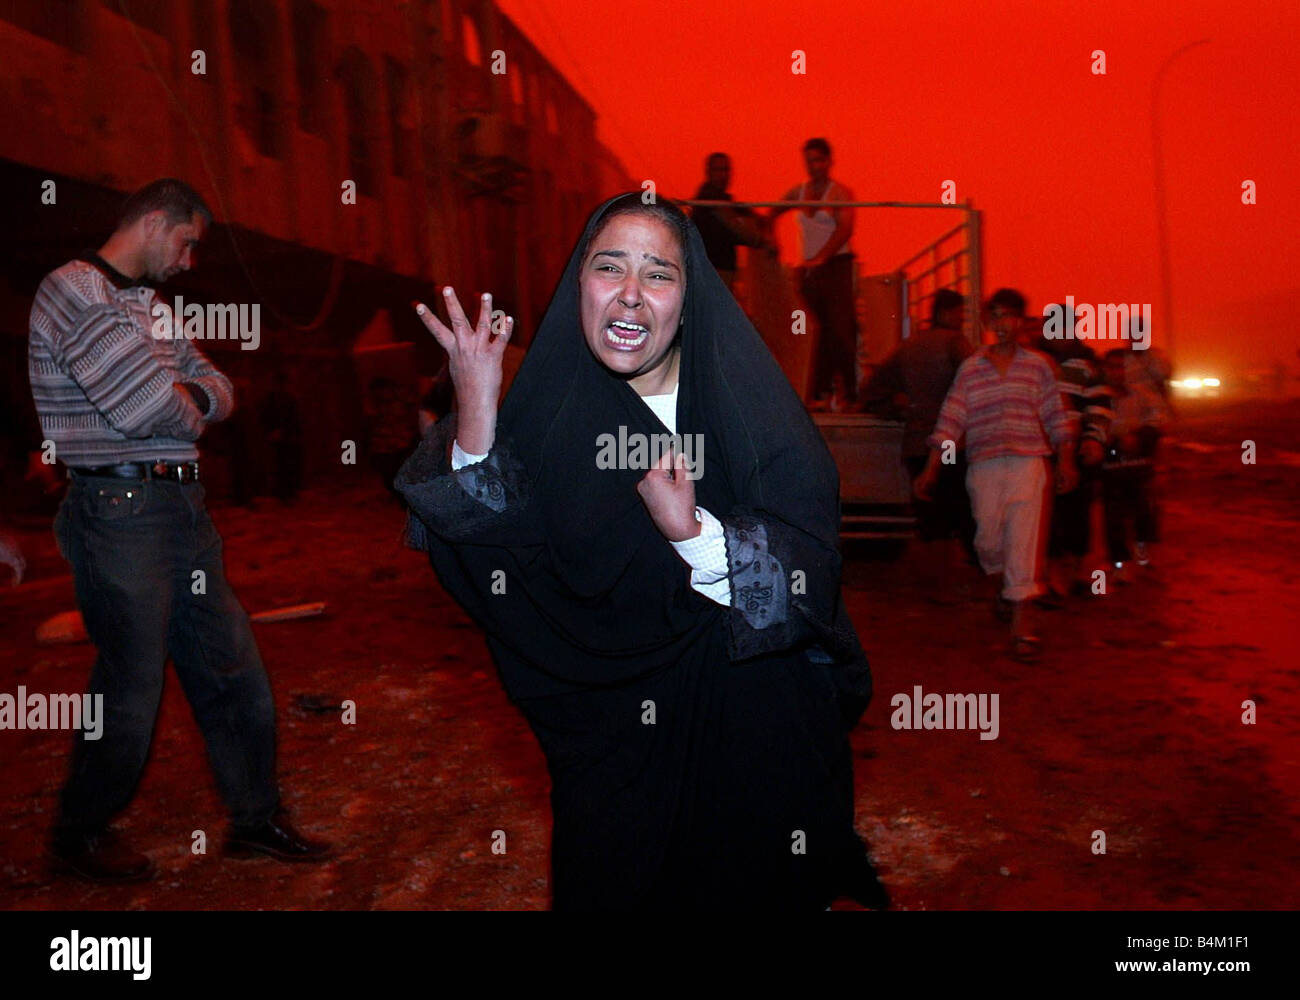 Baghdad following a massive air attack on the area of Al Shahab leaves many civilians dead Our Picture Shows A unidentified woman screaming for her husband believed dead in the blast Against the red tinted sky caused by the combination of severe dust storms and the burning oil fires around Baghdad Stock Photo